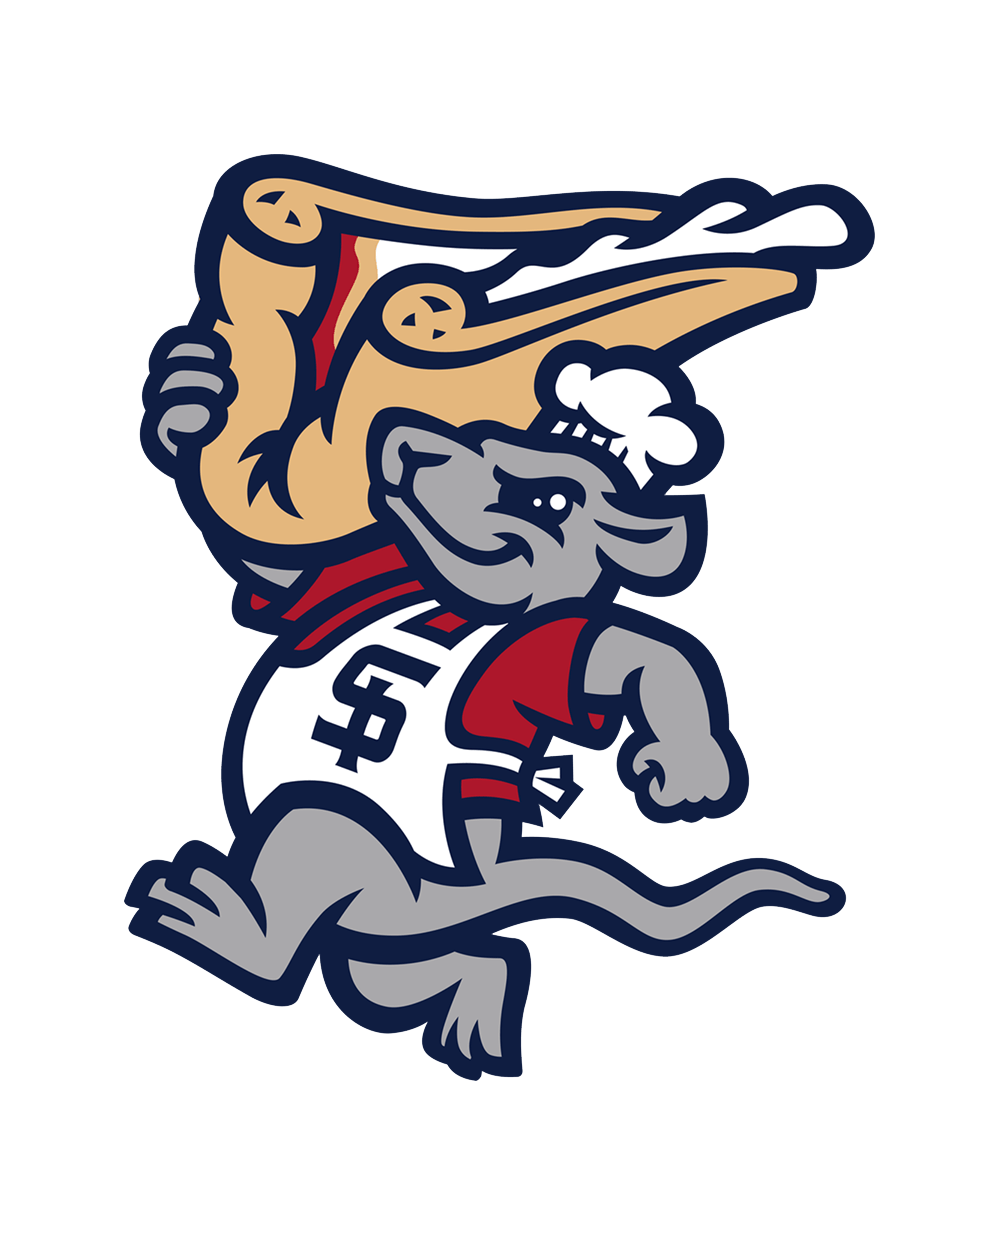 Rat Sports Logo - Welcome the Staten Island Pizza Rats